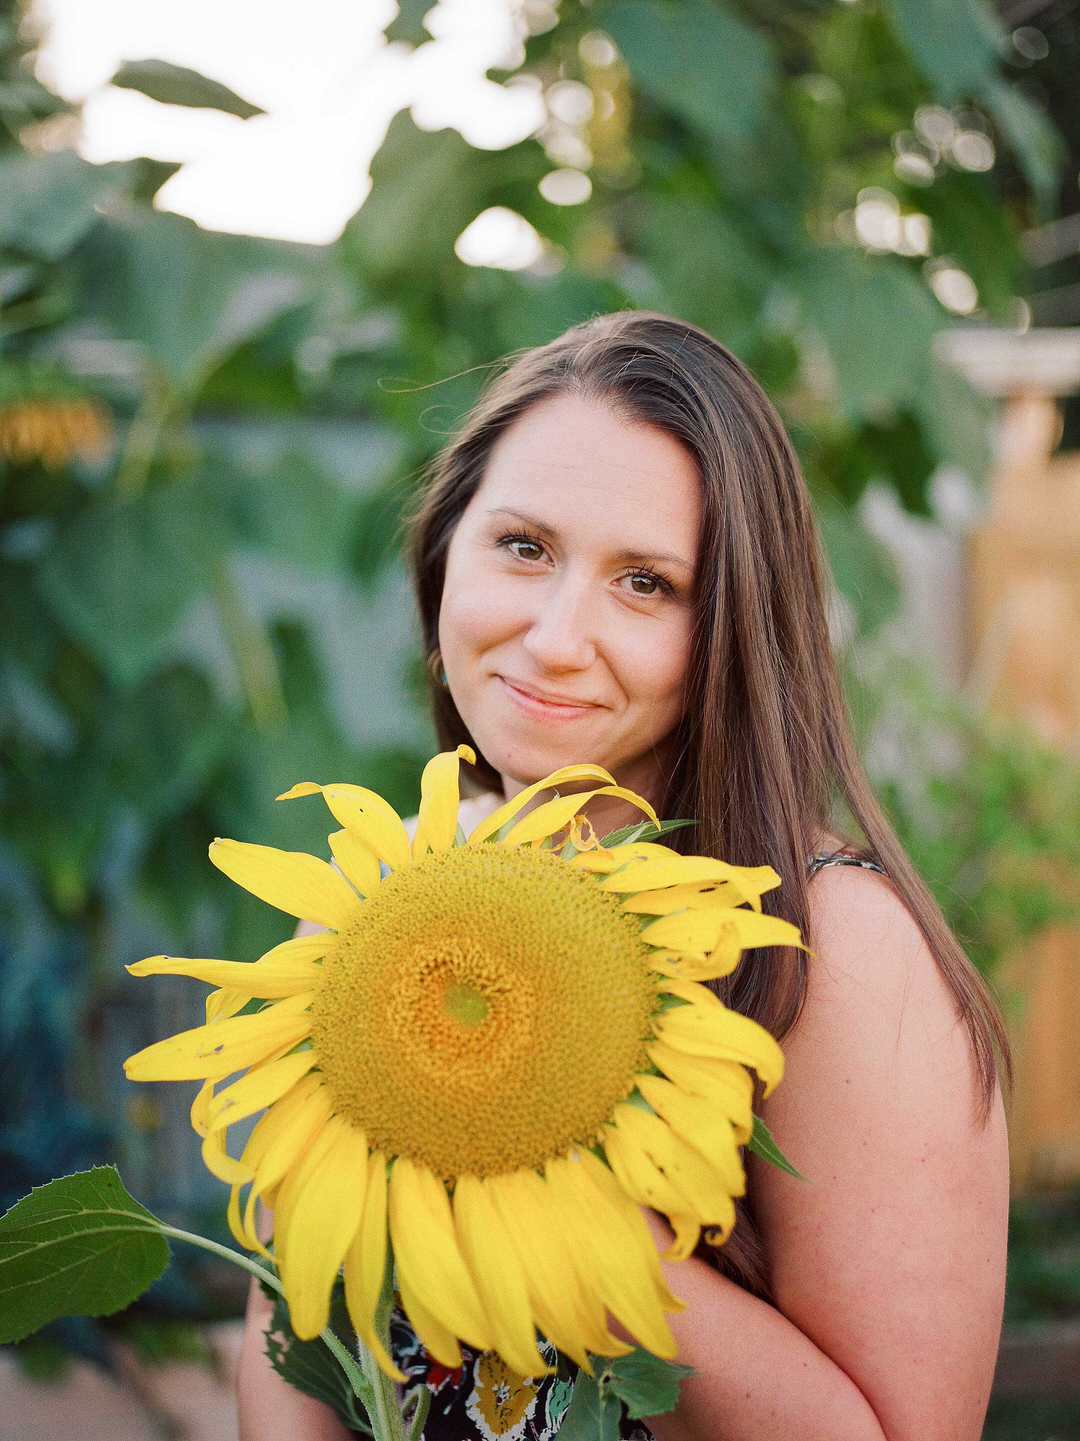 a lady holding a giant sunflower and smiling